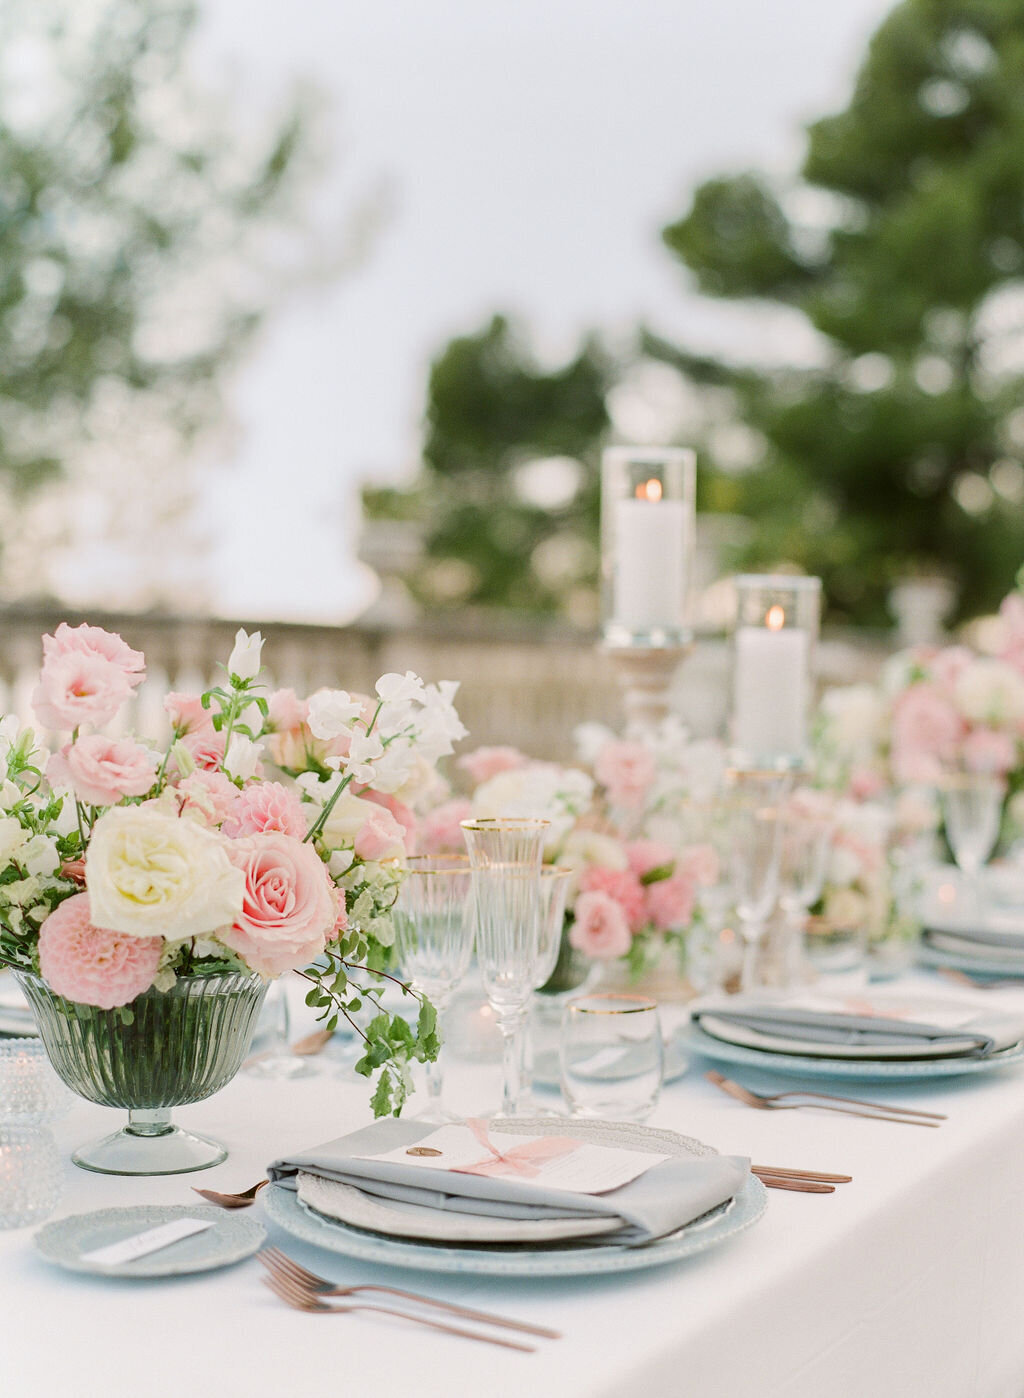 Jennifer Fox Weddings English speaking wedding planning & design agency in France crafting refined and bespoke weddings and celebrations Provence, Paris and destination Alyssa-Aaron-Wedding-Molly-Carr-Photography-Dinner-15